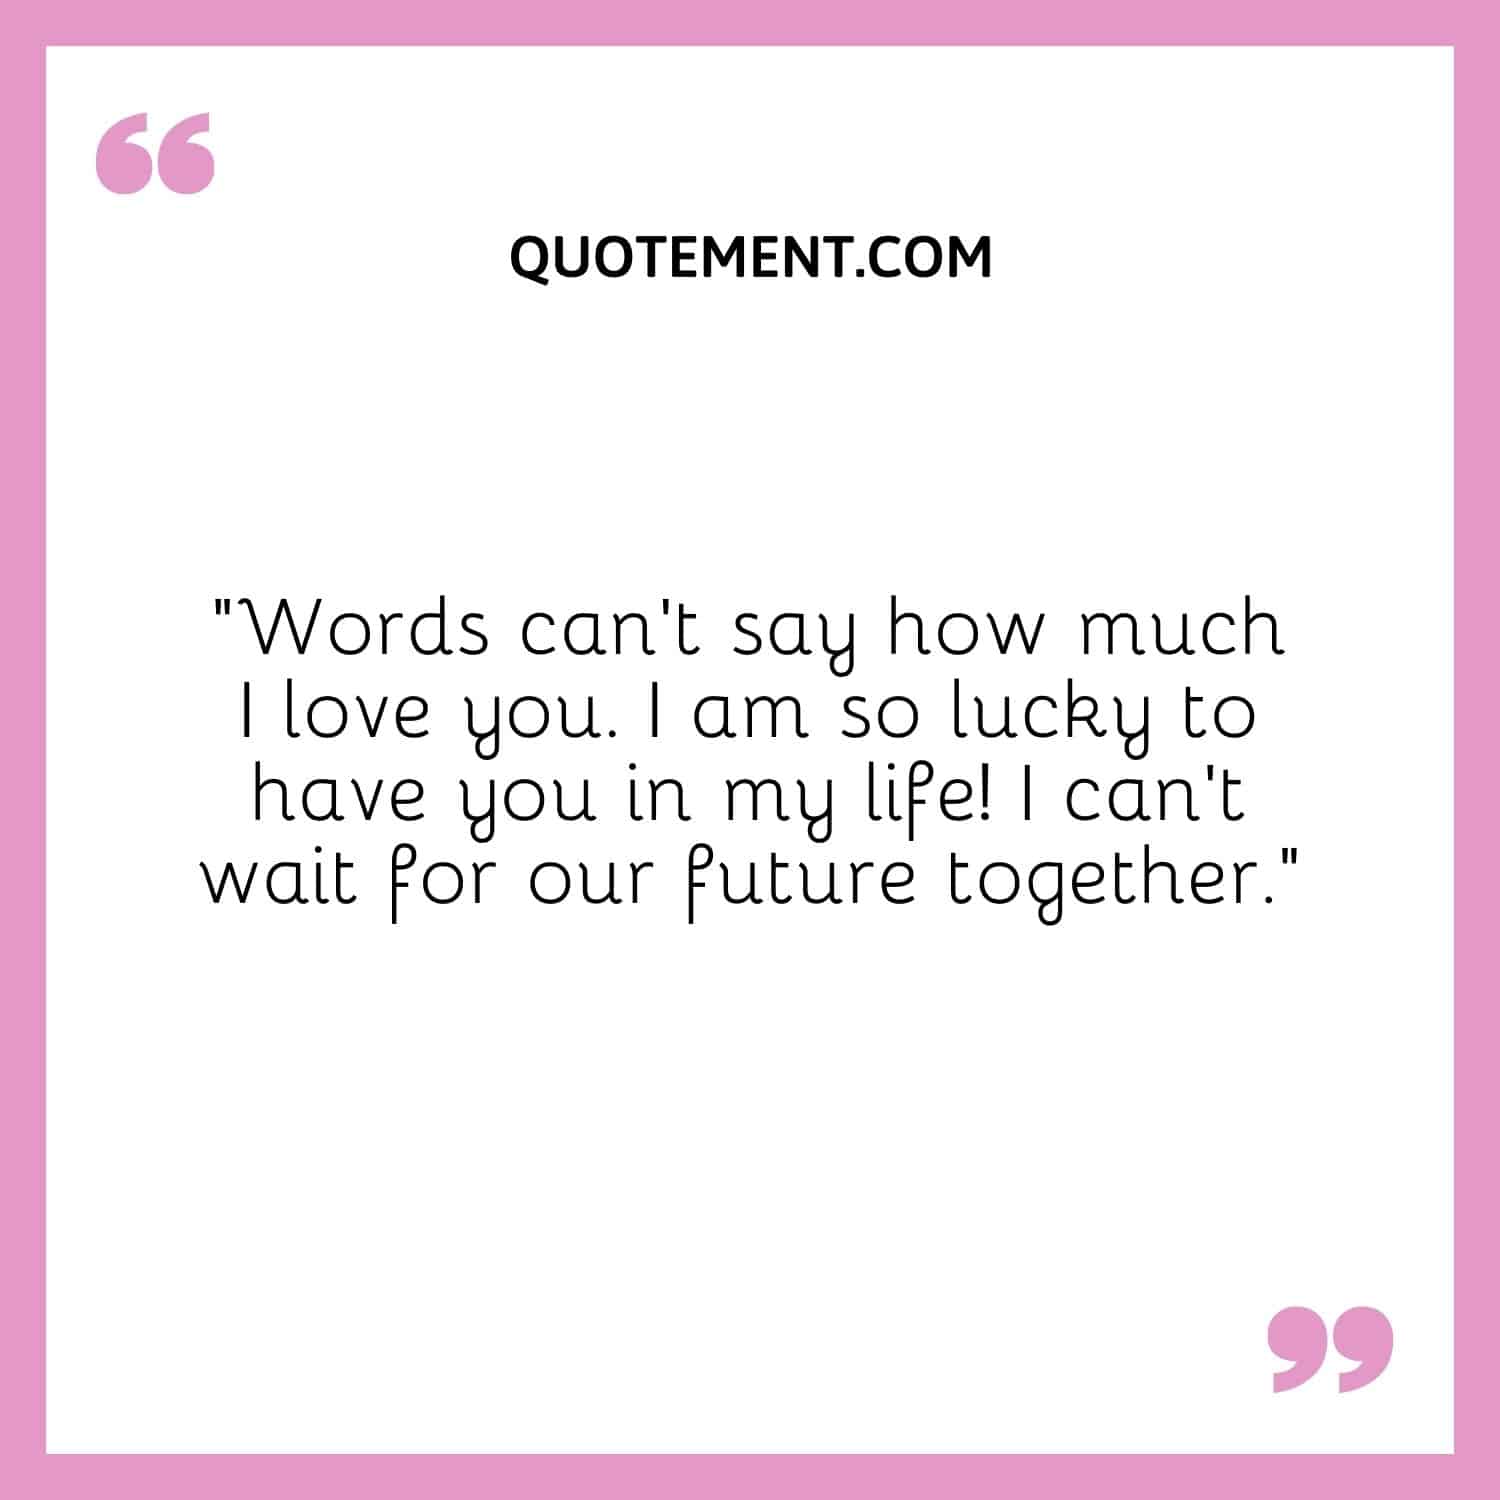 “Words can’t say how much I love you. I am so lucky to have you in my life! I can’t wait for our future together.”